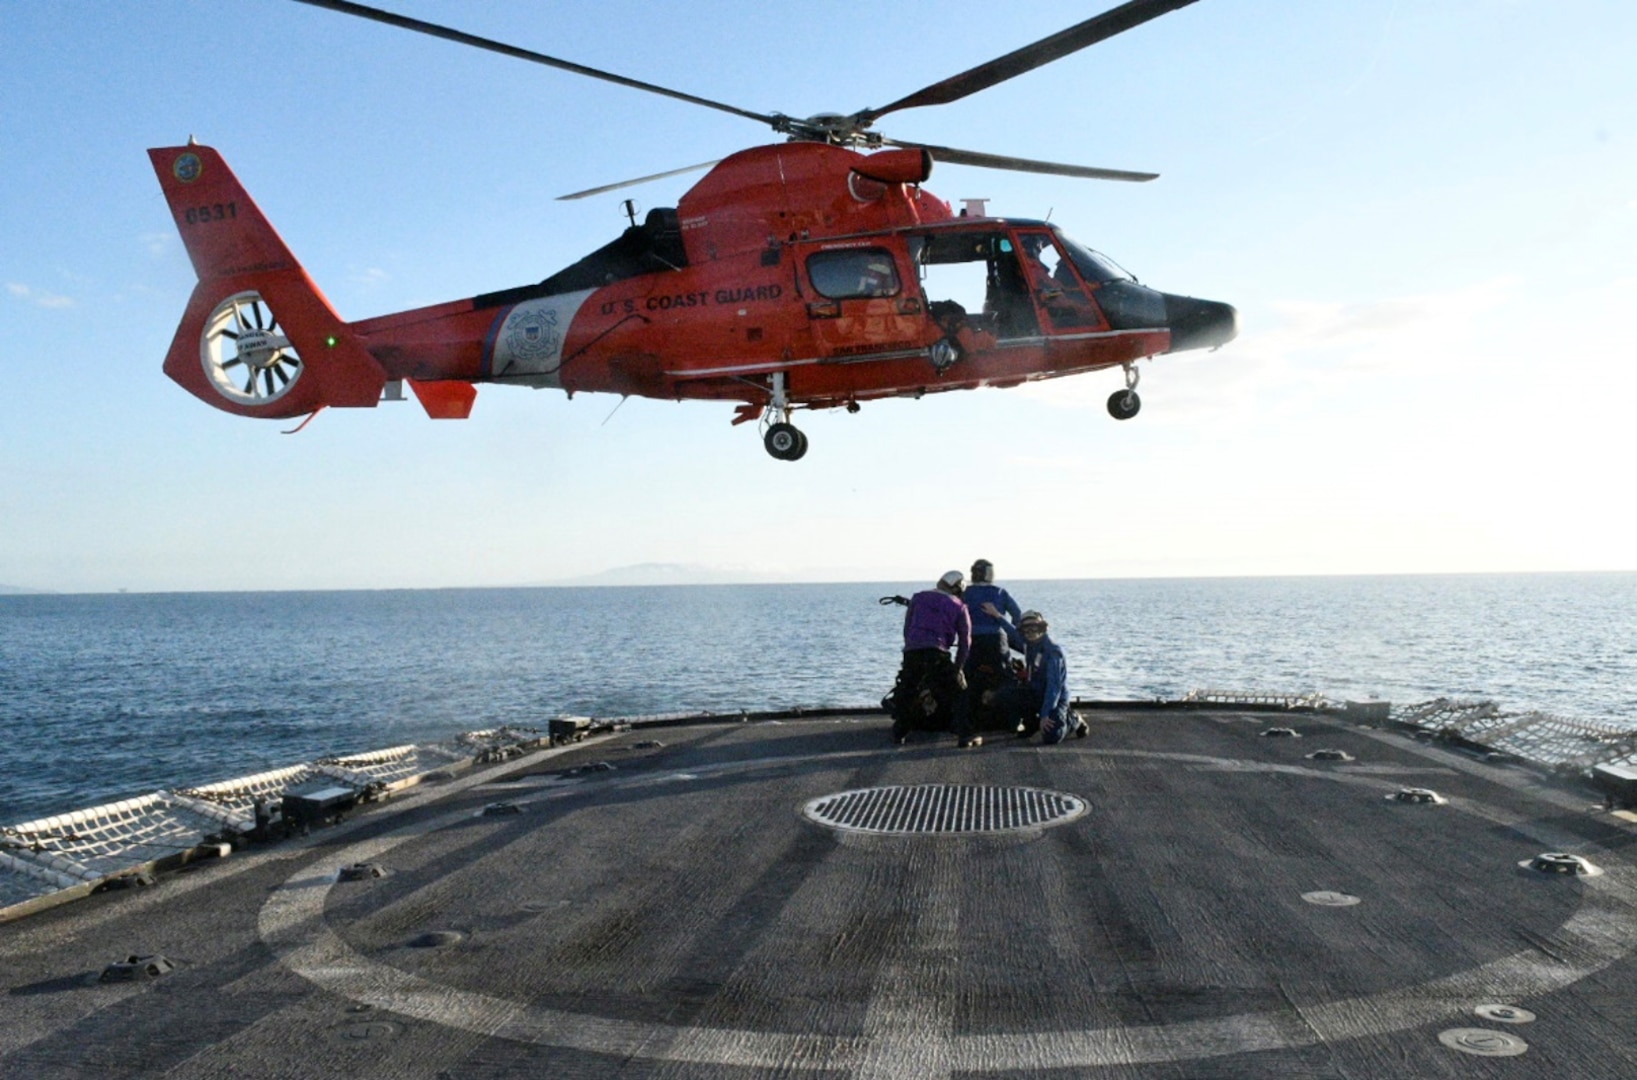 USCGC Active (WMEC 618) crewmembers assigned to the cutter’s hook-up team prepare to attach a load during a vertical replenishment (VERTREP) exercise off the coast of Southern California with an MH-65E helicopter aircrew from Forward Operation Base Point Mugu, California, Mar. 17, 2024. A VERTREP is a logistical operation to resupply ships at sea utilizing helicopters to transport supplies and equipment between ships. U.S. Coast Guard photo by Chief Petty Officer Shane Sexton.